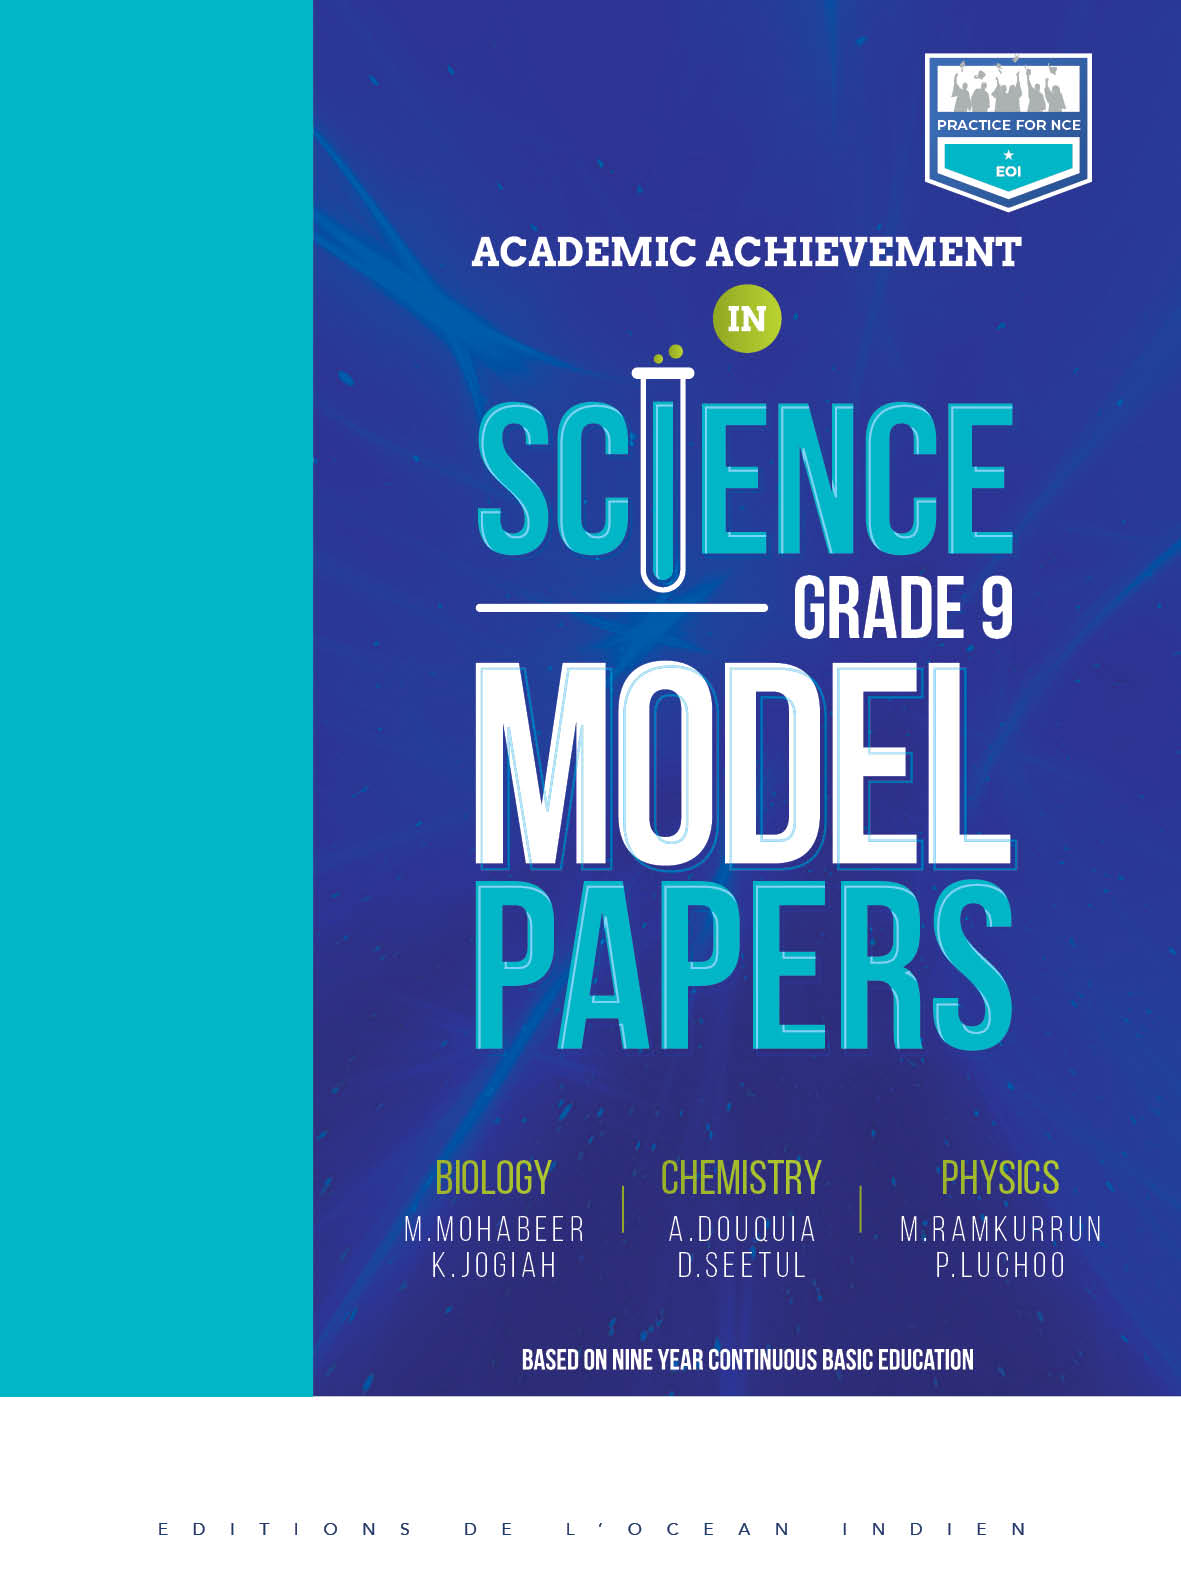 ACADEMIC ACHIEVEMENT IN SCIENCE GRADE 9 MODEL PAPERS